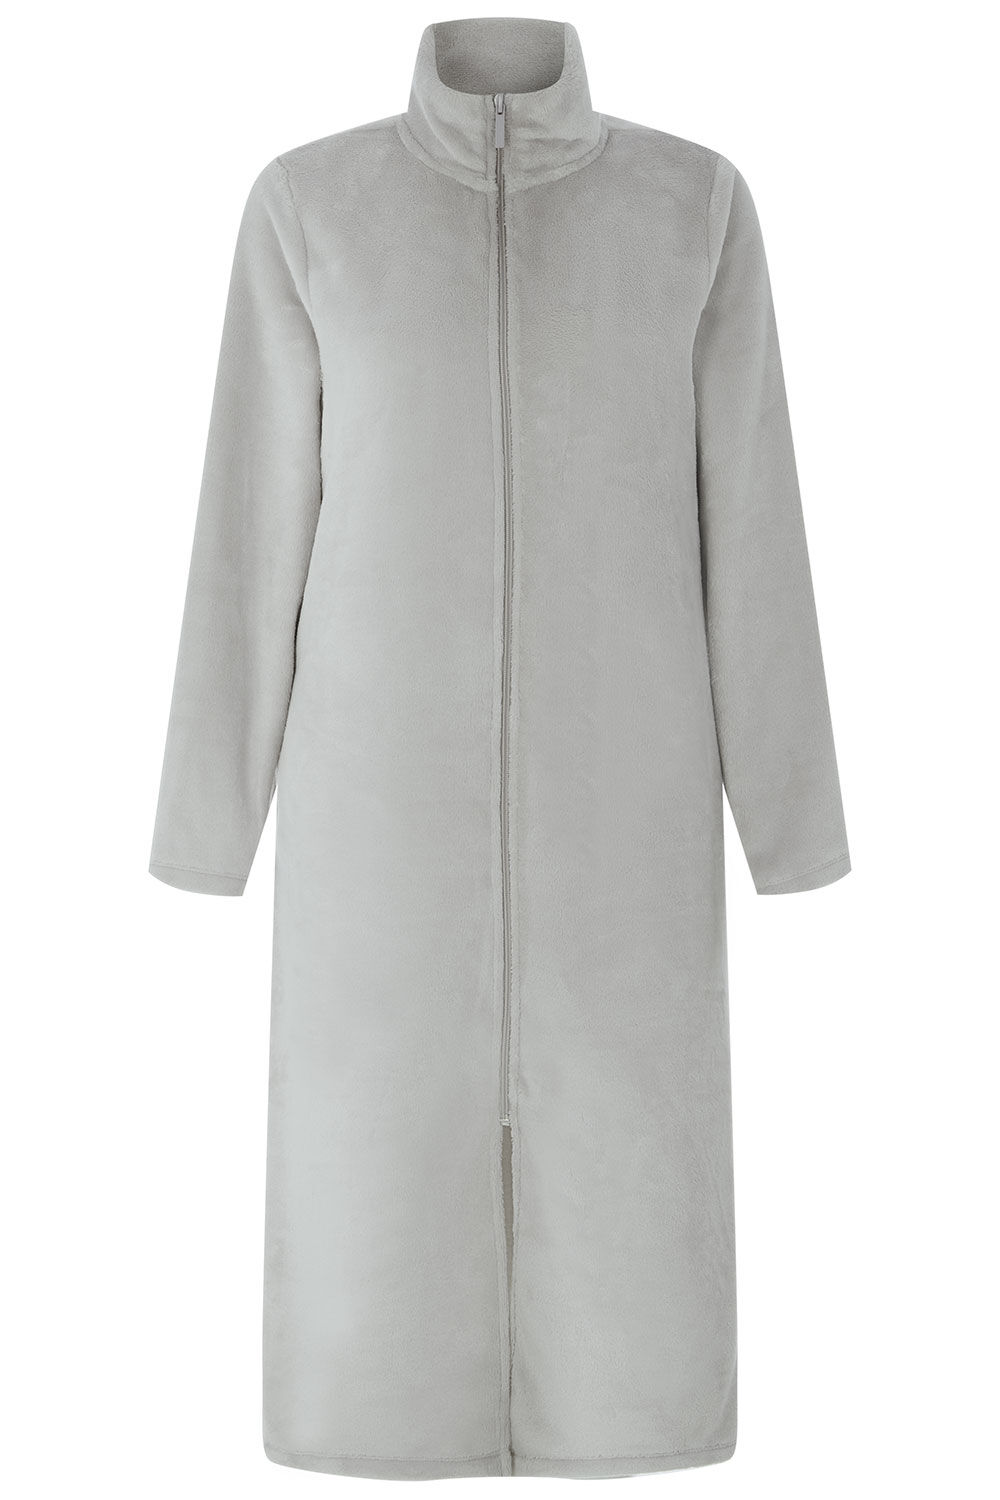 Undercover Ladies Zipped Soft Fleece Dressing Gown 4045 Pink 10-12 :  Amazon.co.uk: Fashion